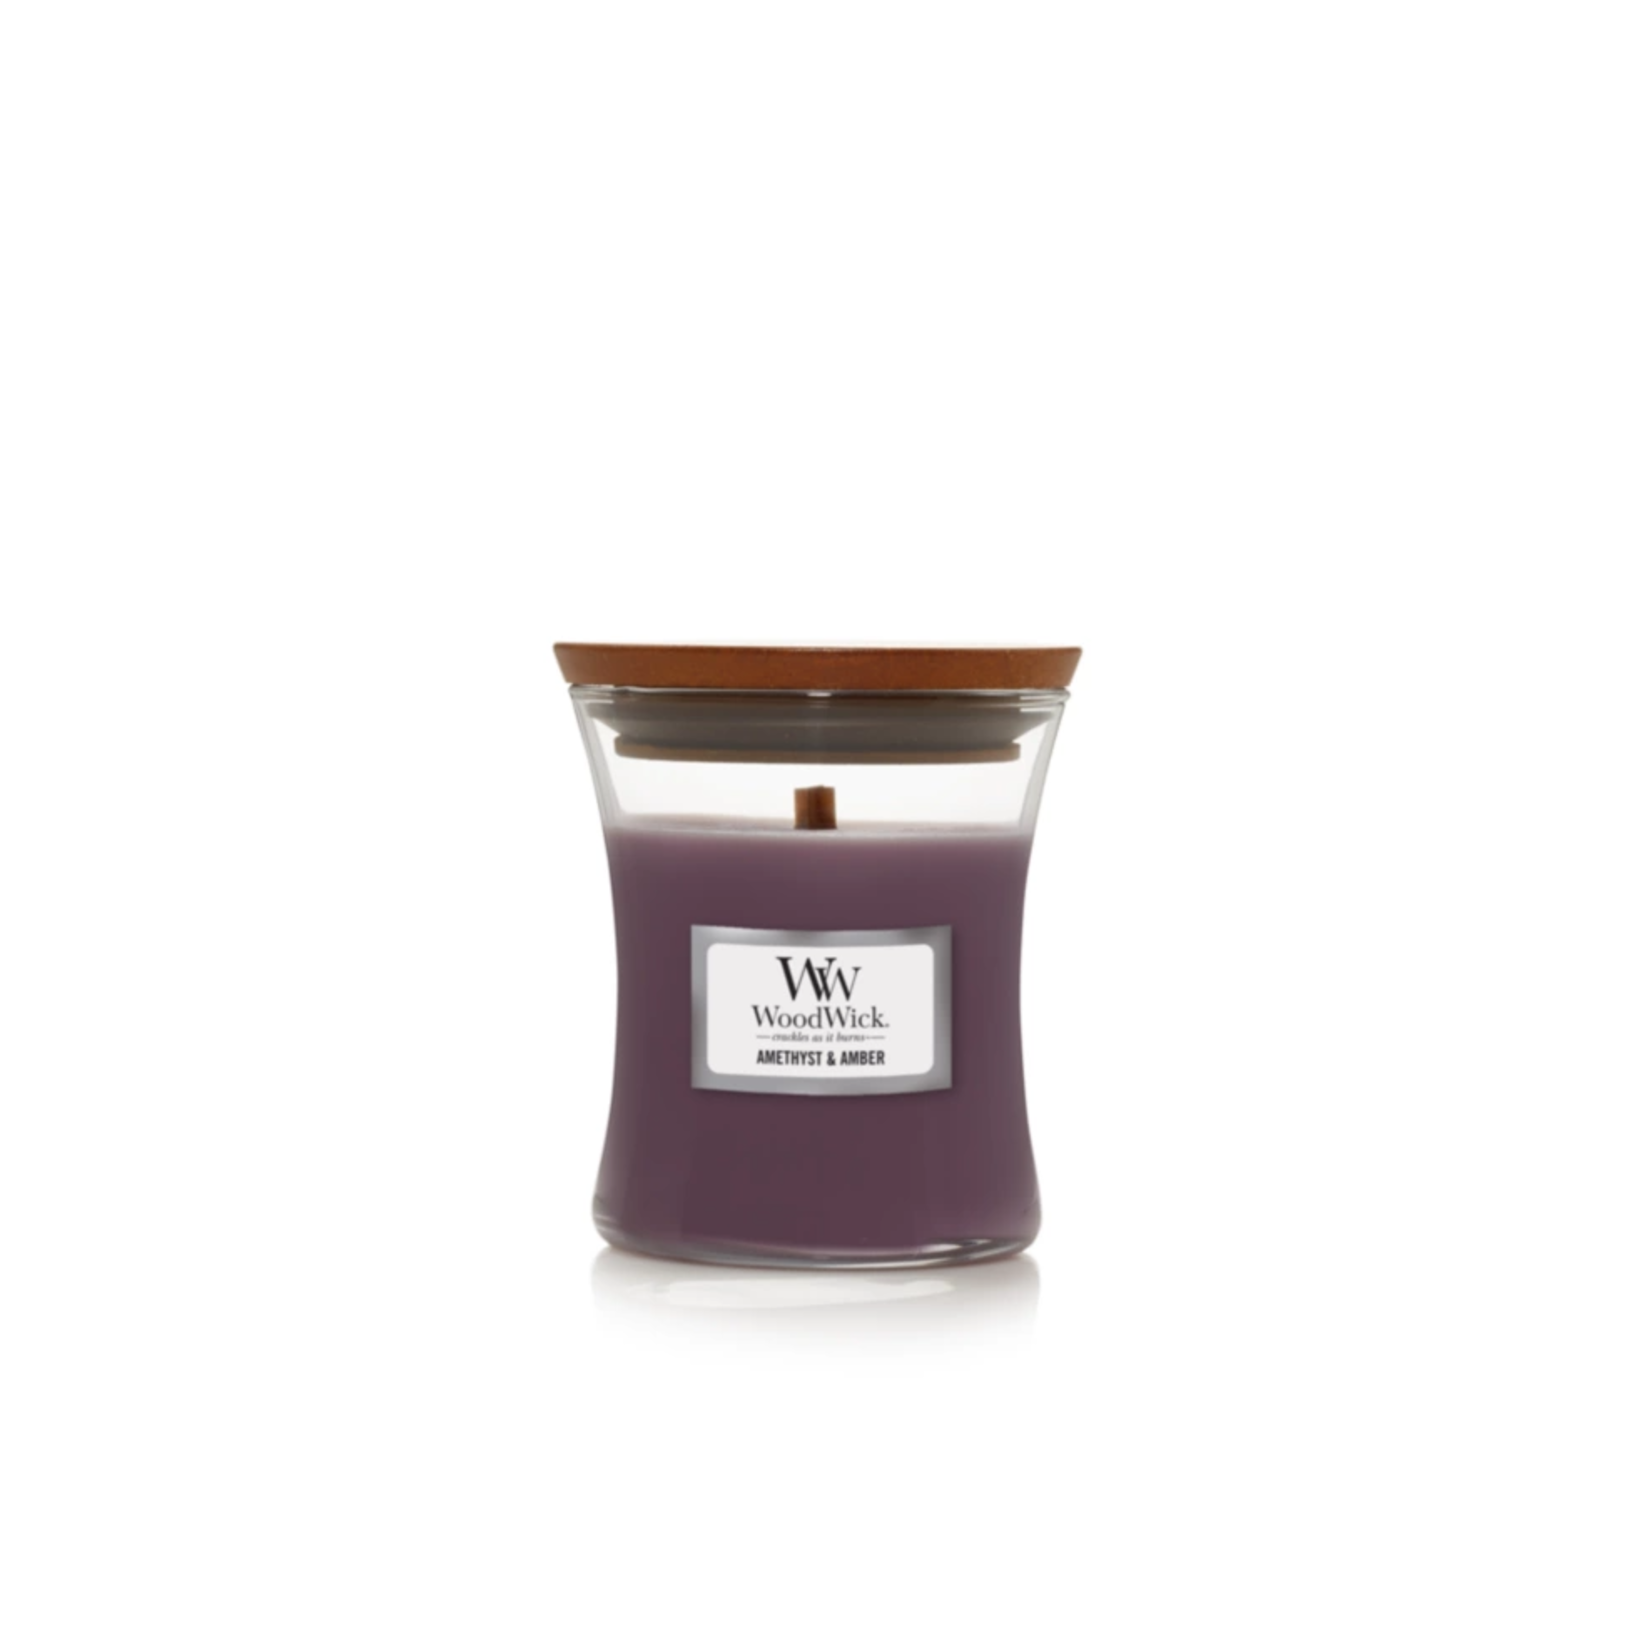 Woodwick Candle - Amethyst & Amber